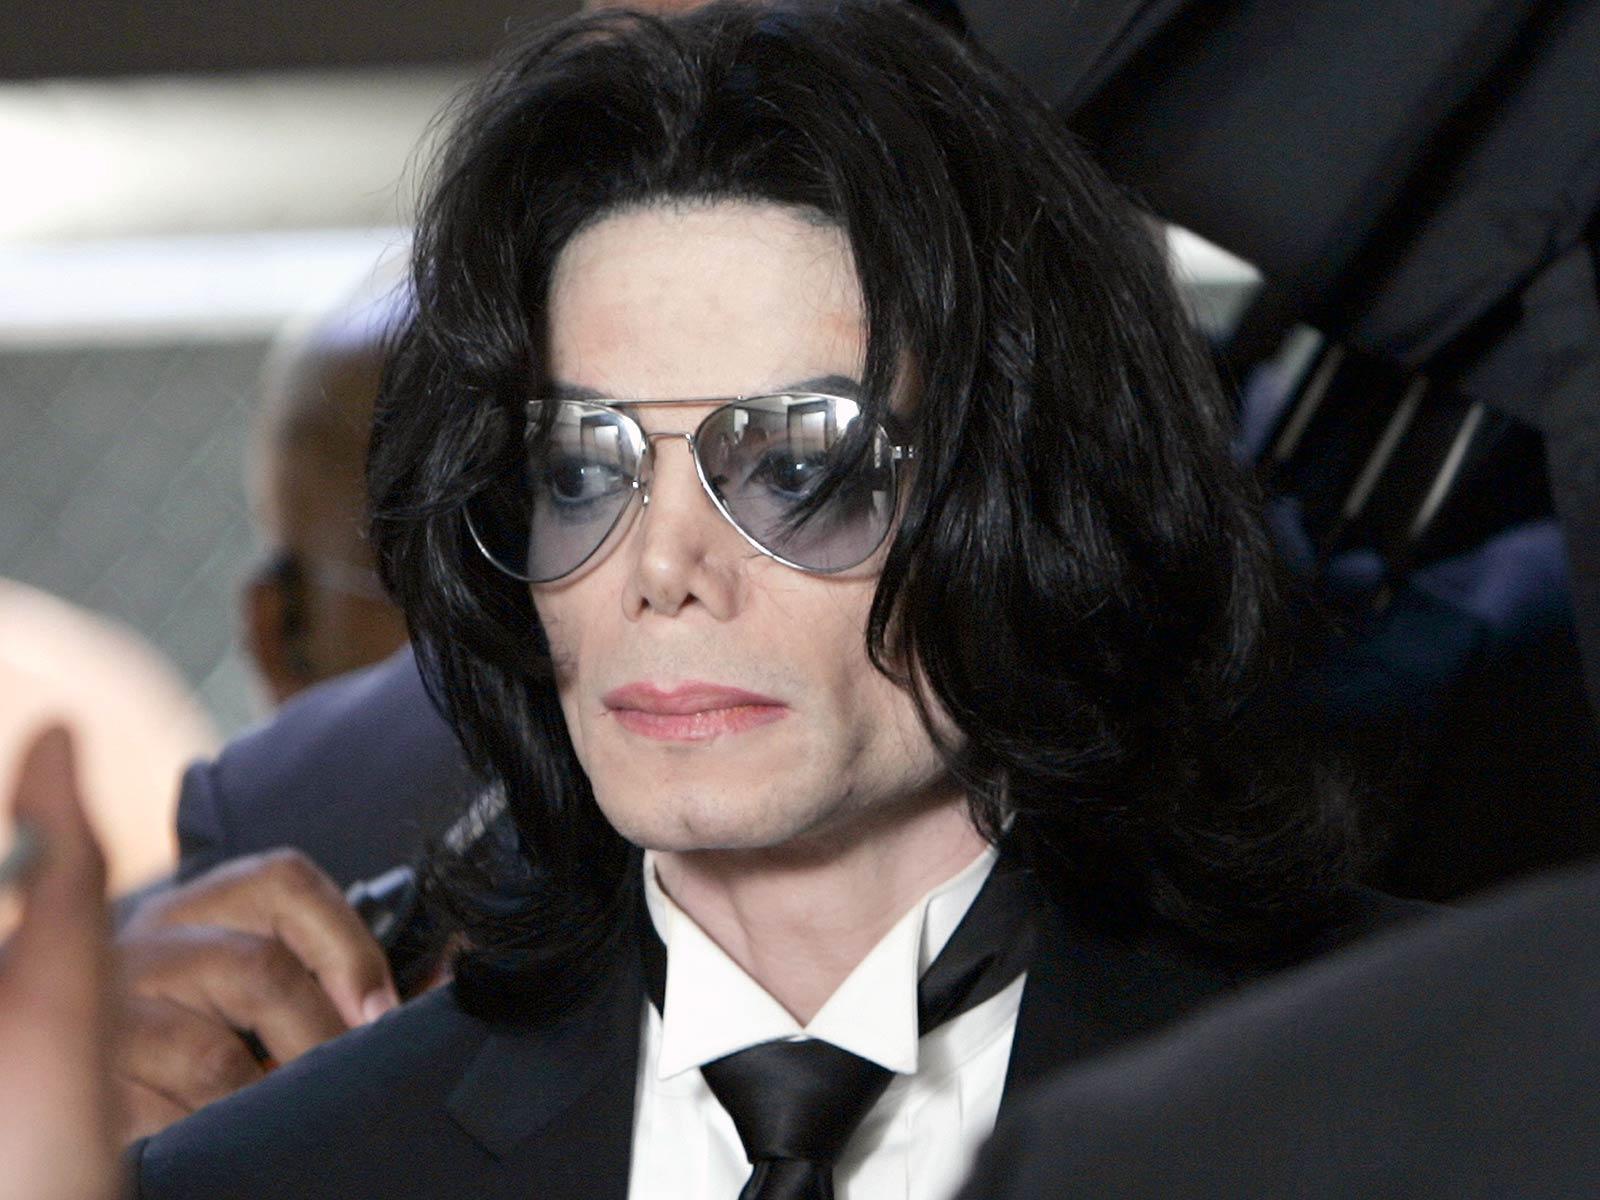 Michael Jackson exits the Santa Barbara County Superior Court after the verdict aquitting him of all 10 counts in the child molestation and conspiracy case against him was read, Santa Maria, California, June 13, 2005.
